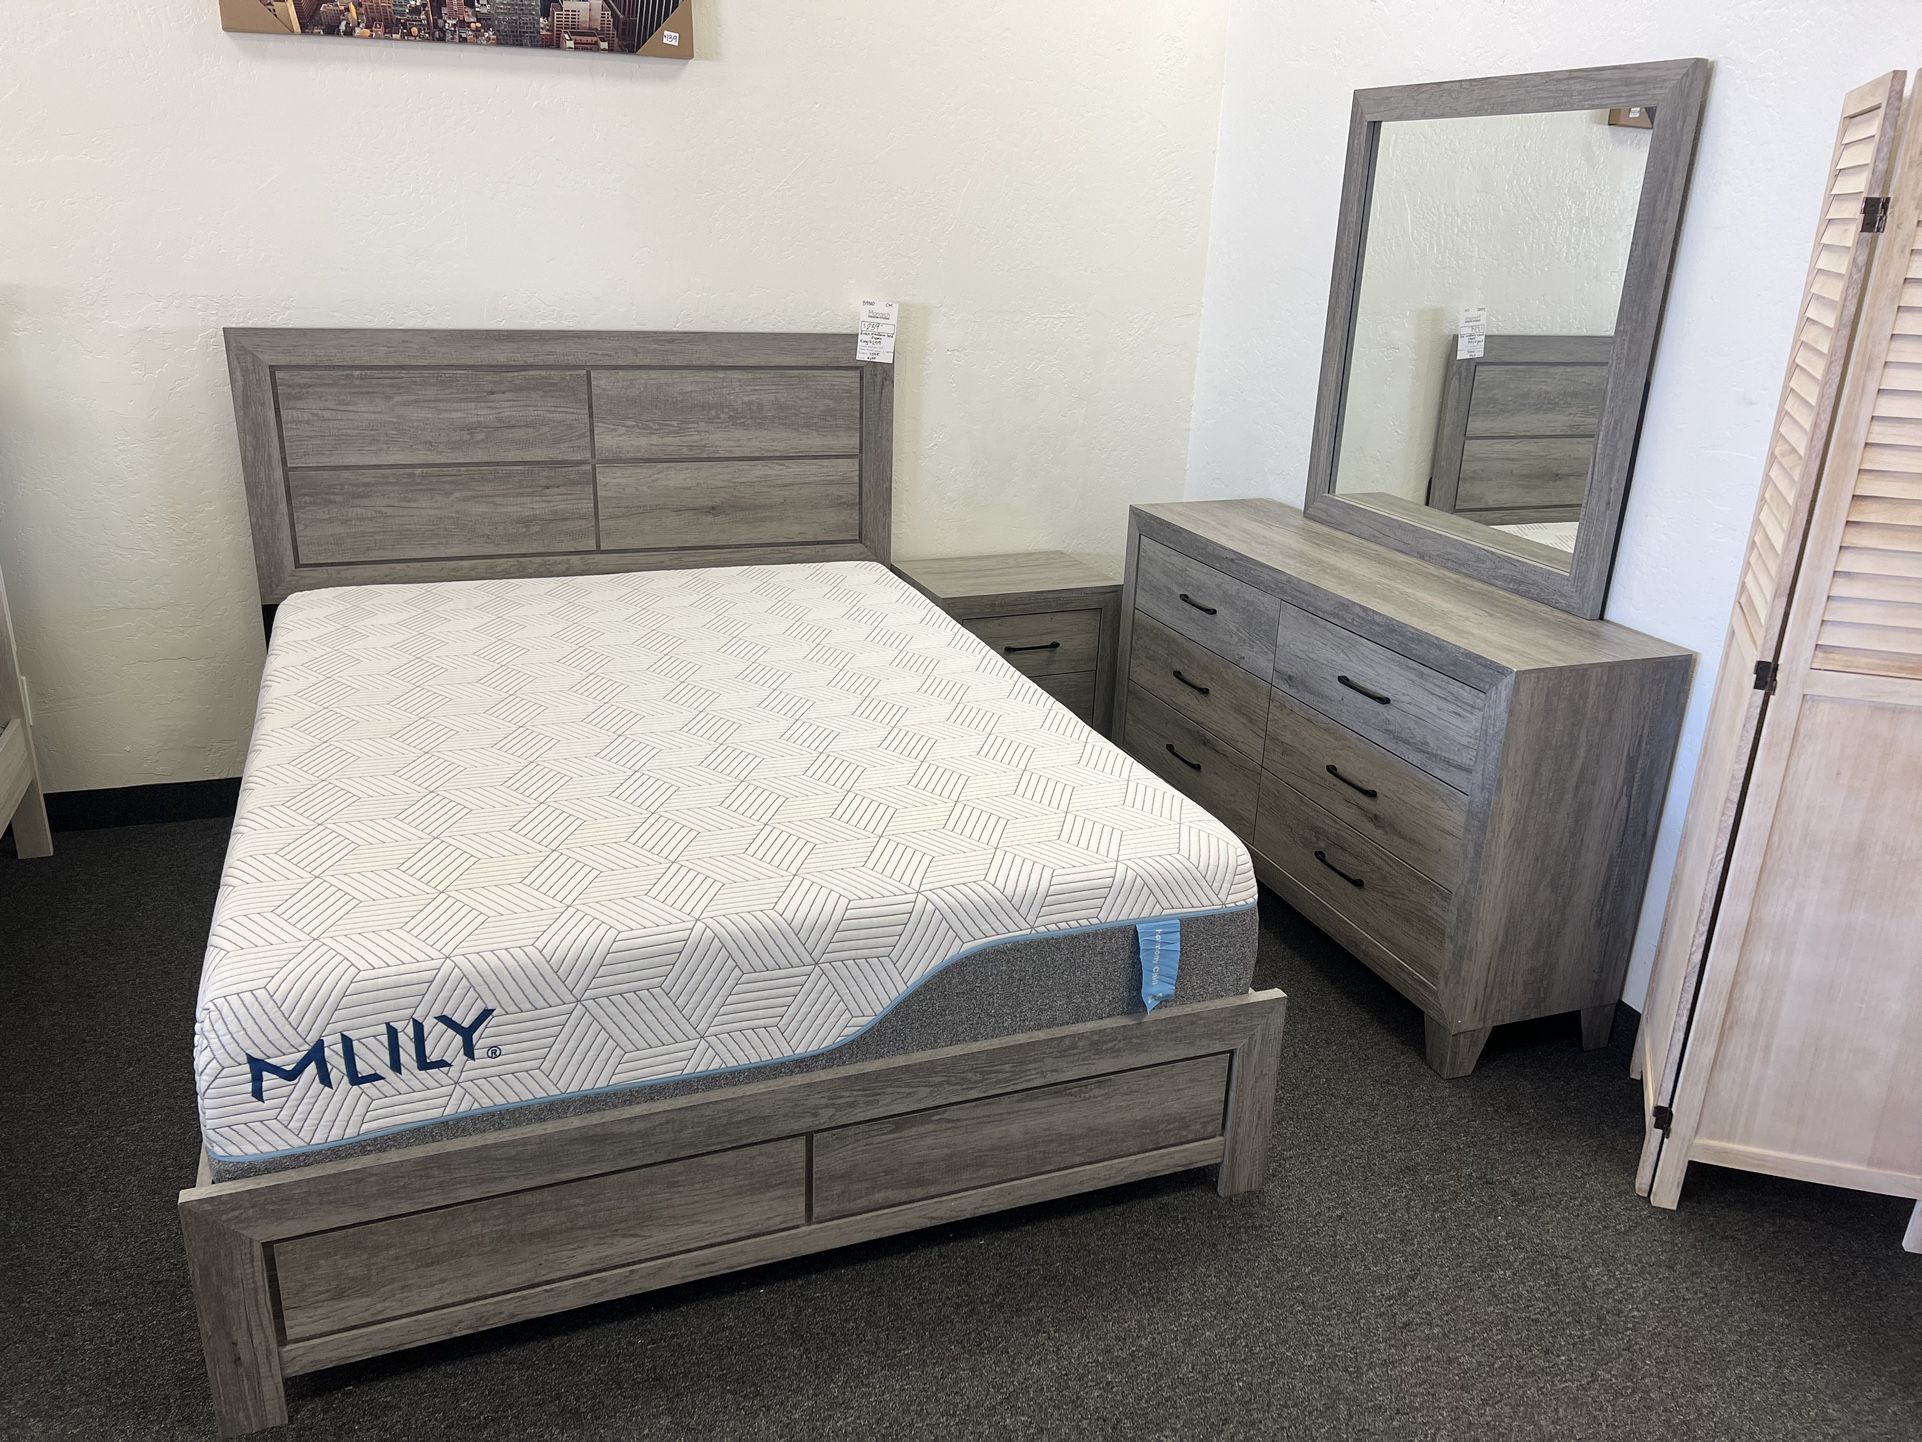 Queen Bedroom Set In Grey With Platform Bed Frame One Nightstand And Dresser With Mirror